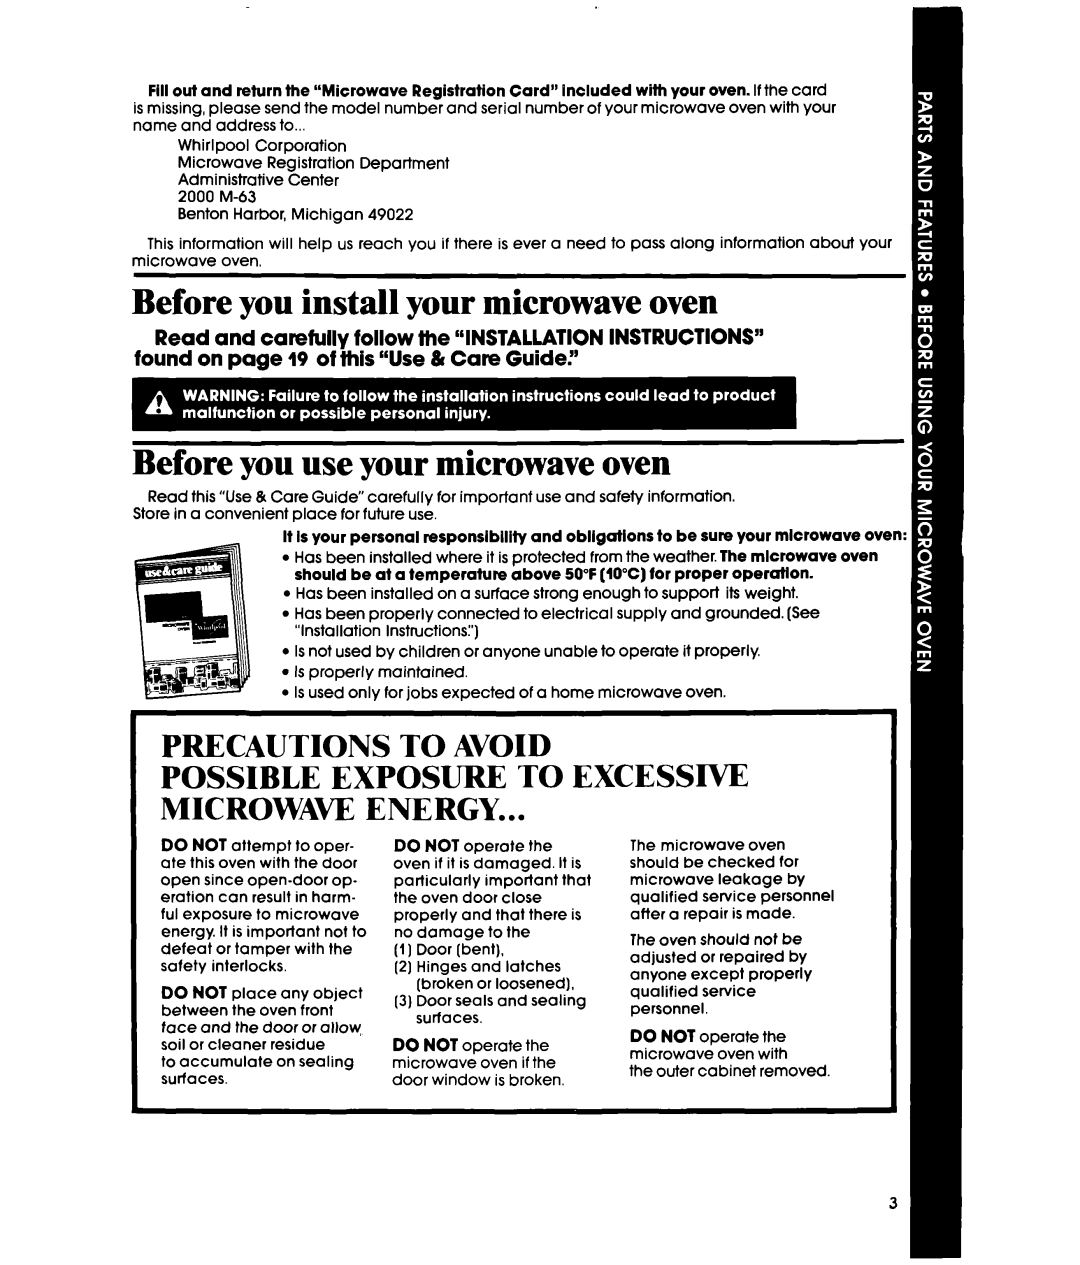 Whirlpool MW3500XS manual Before you install your microwave oven, Before you use your microwave oven, Precautions To Avoid 